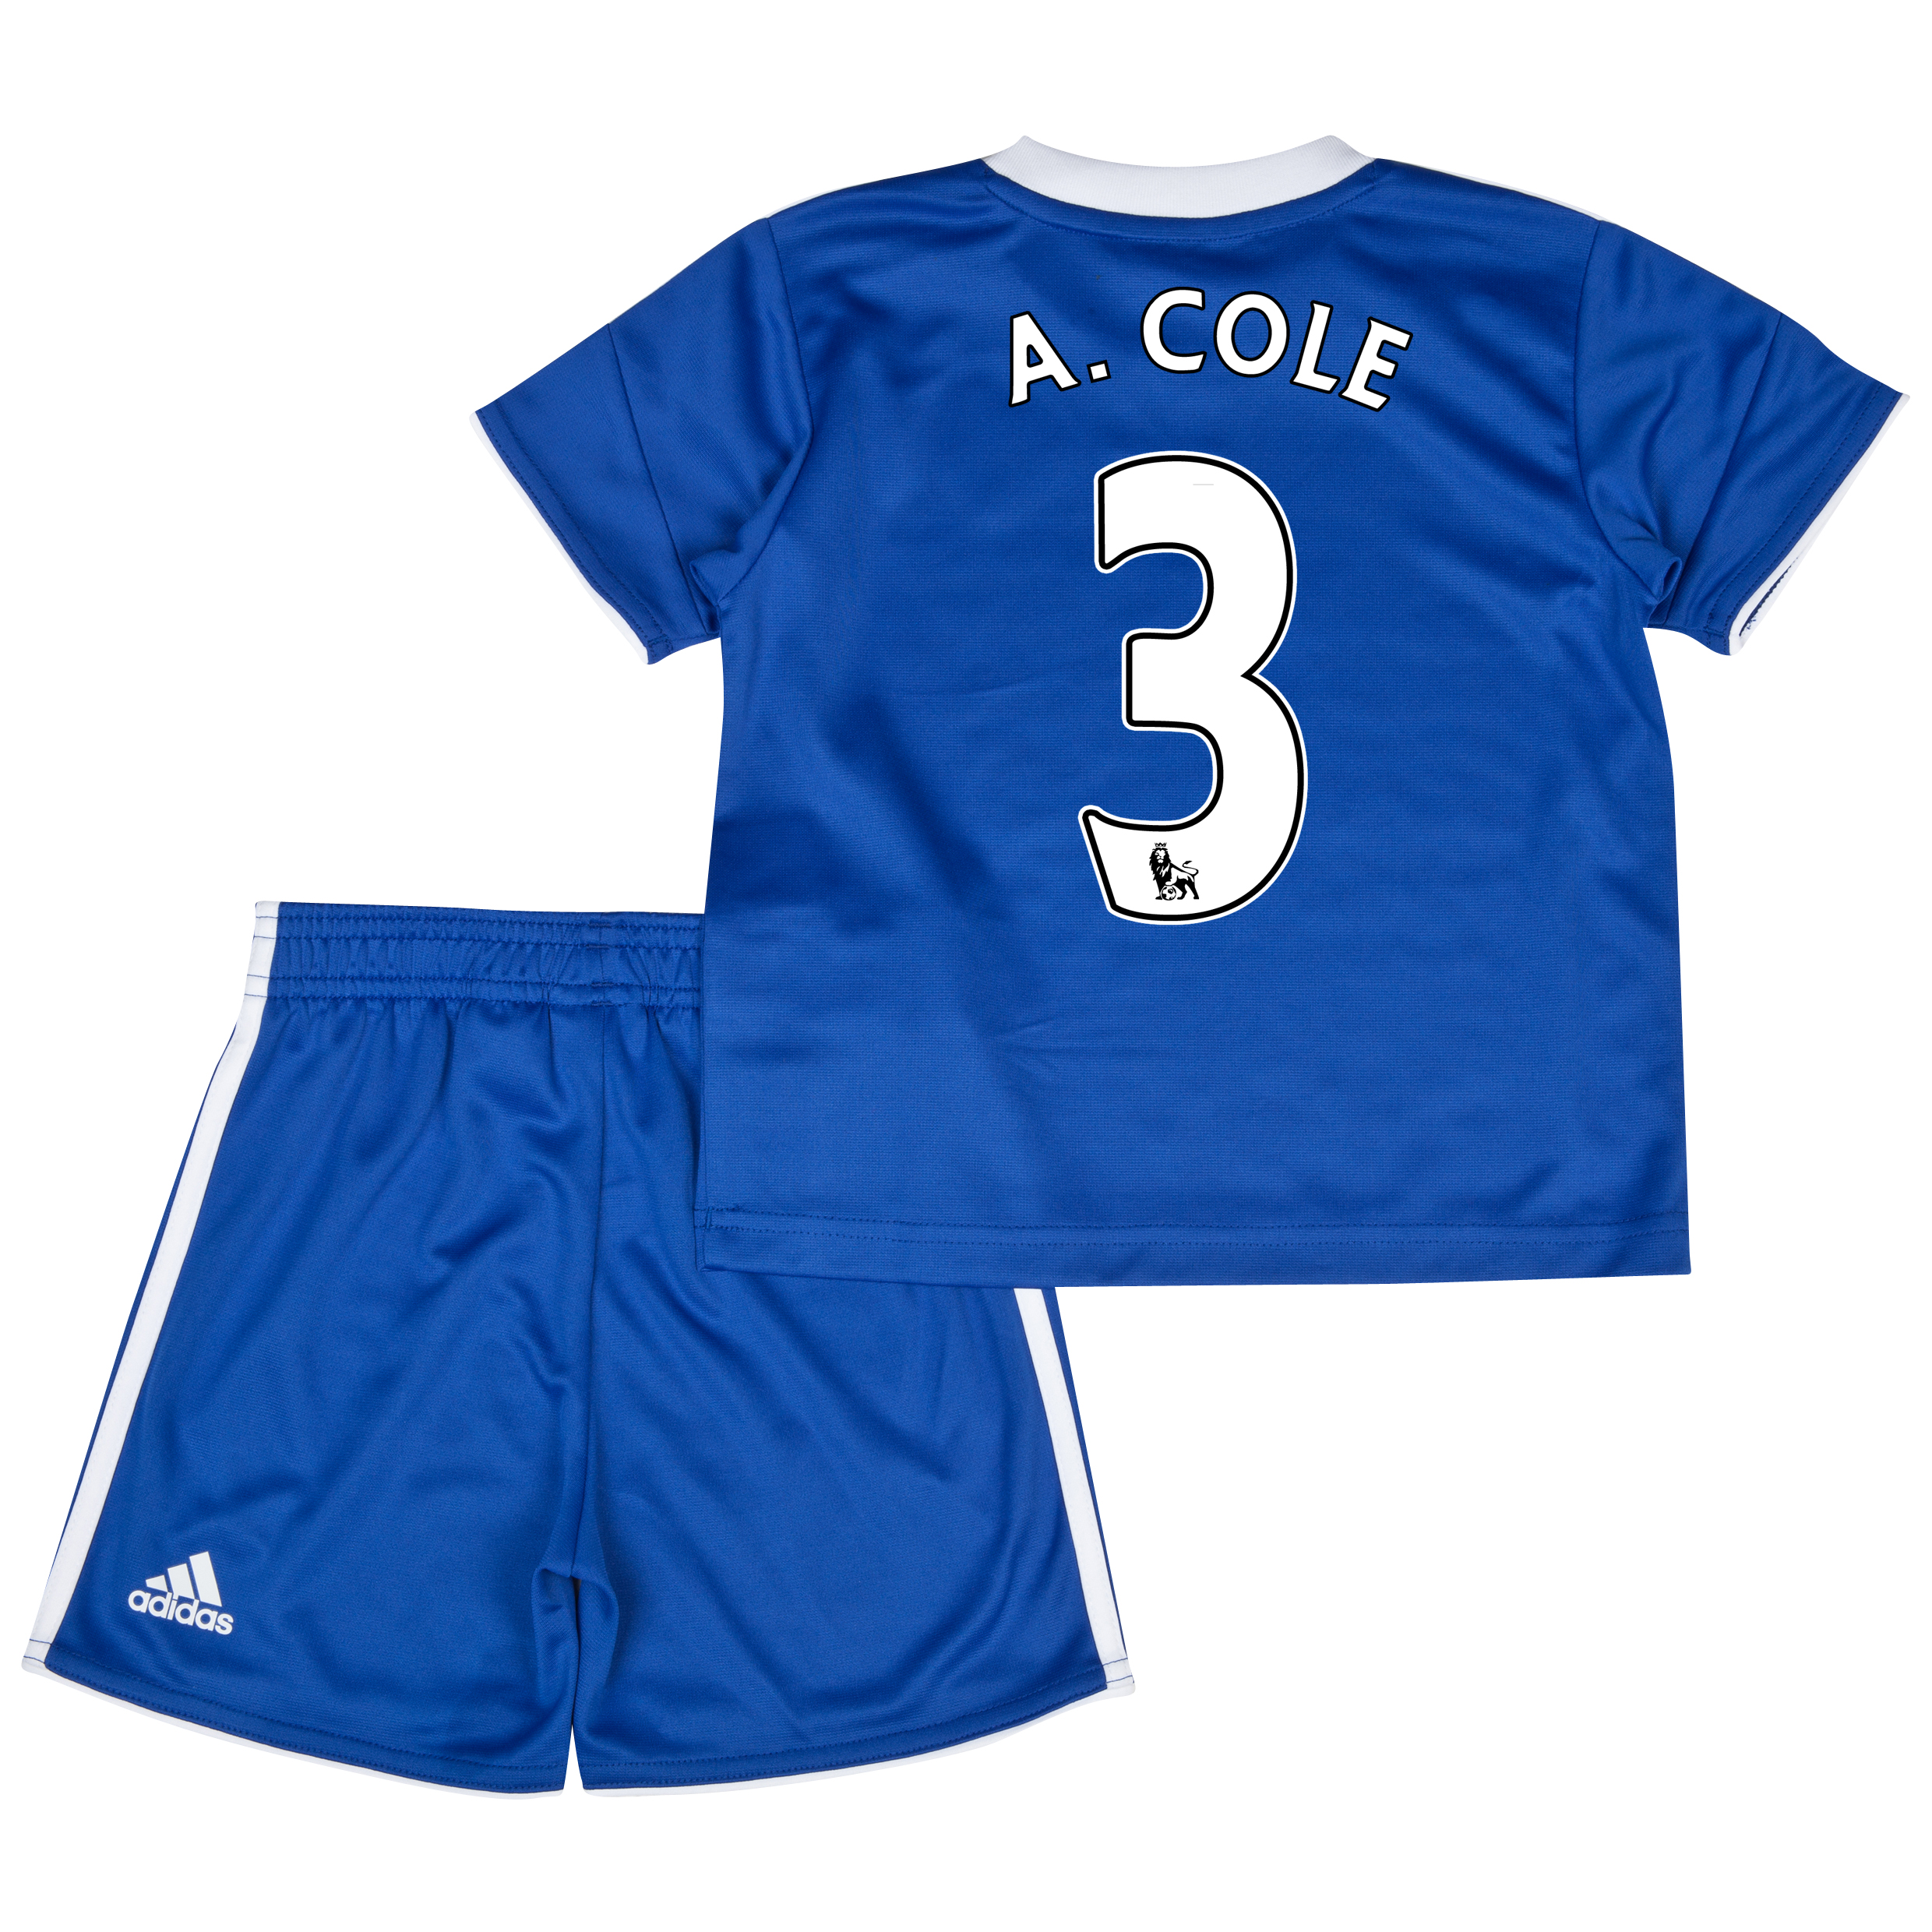 Chelsea Home Mini Kit 2013/14 with A.Cole 3 printing